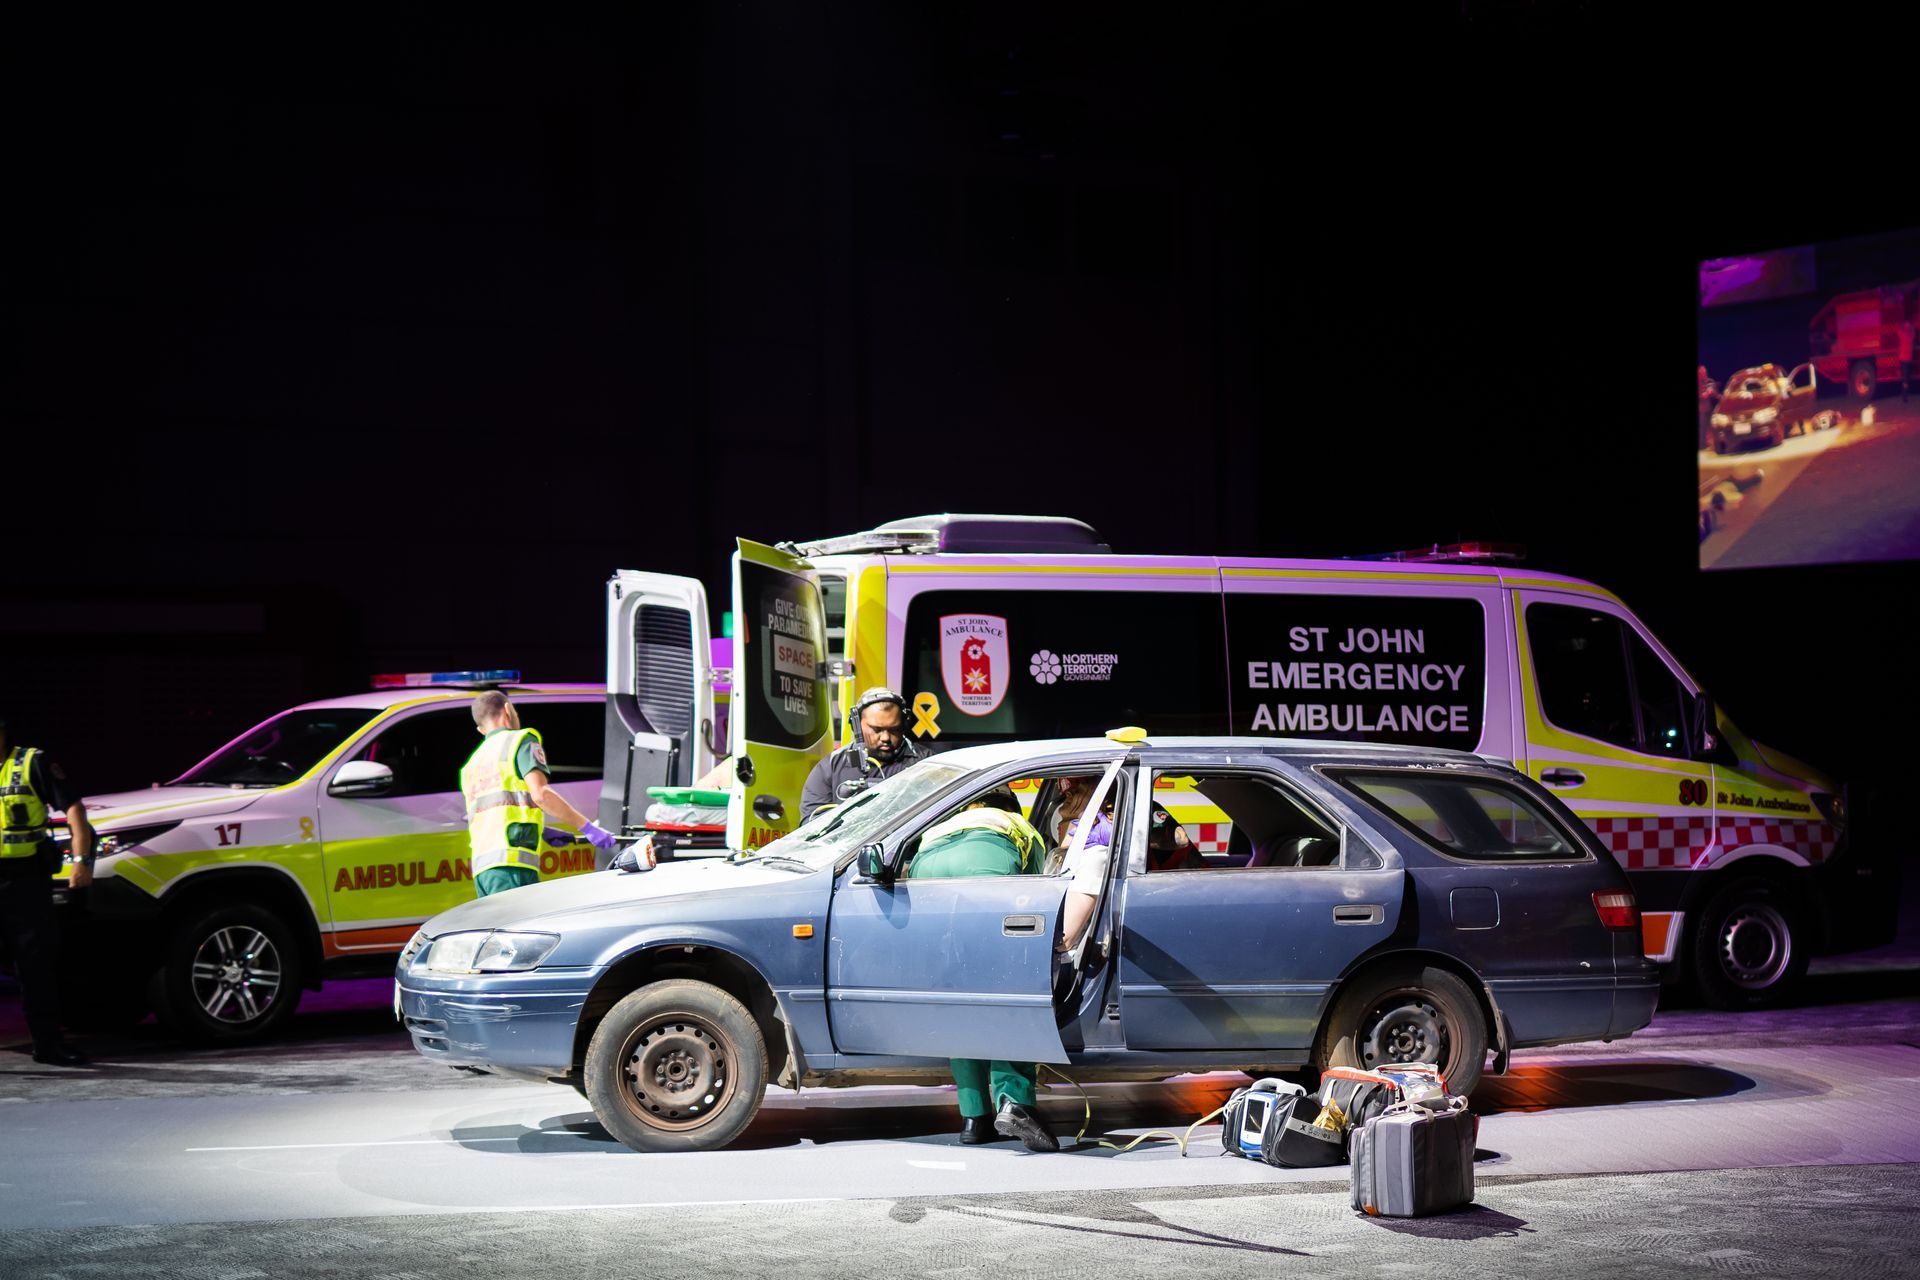 A blue car is parked next to an ambulance on a stage.